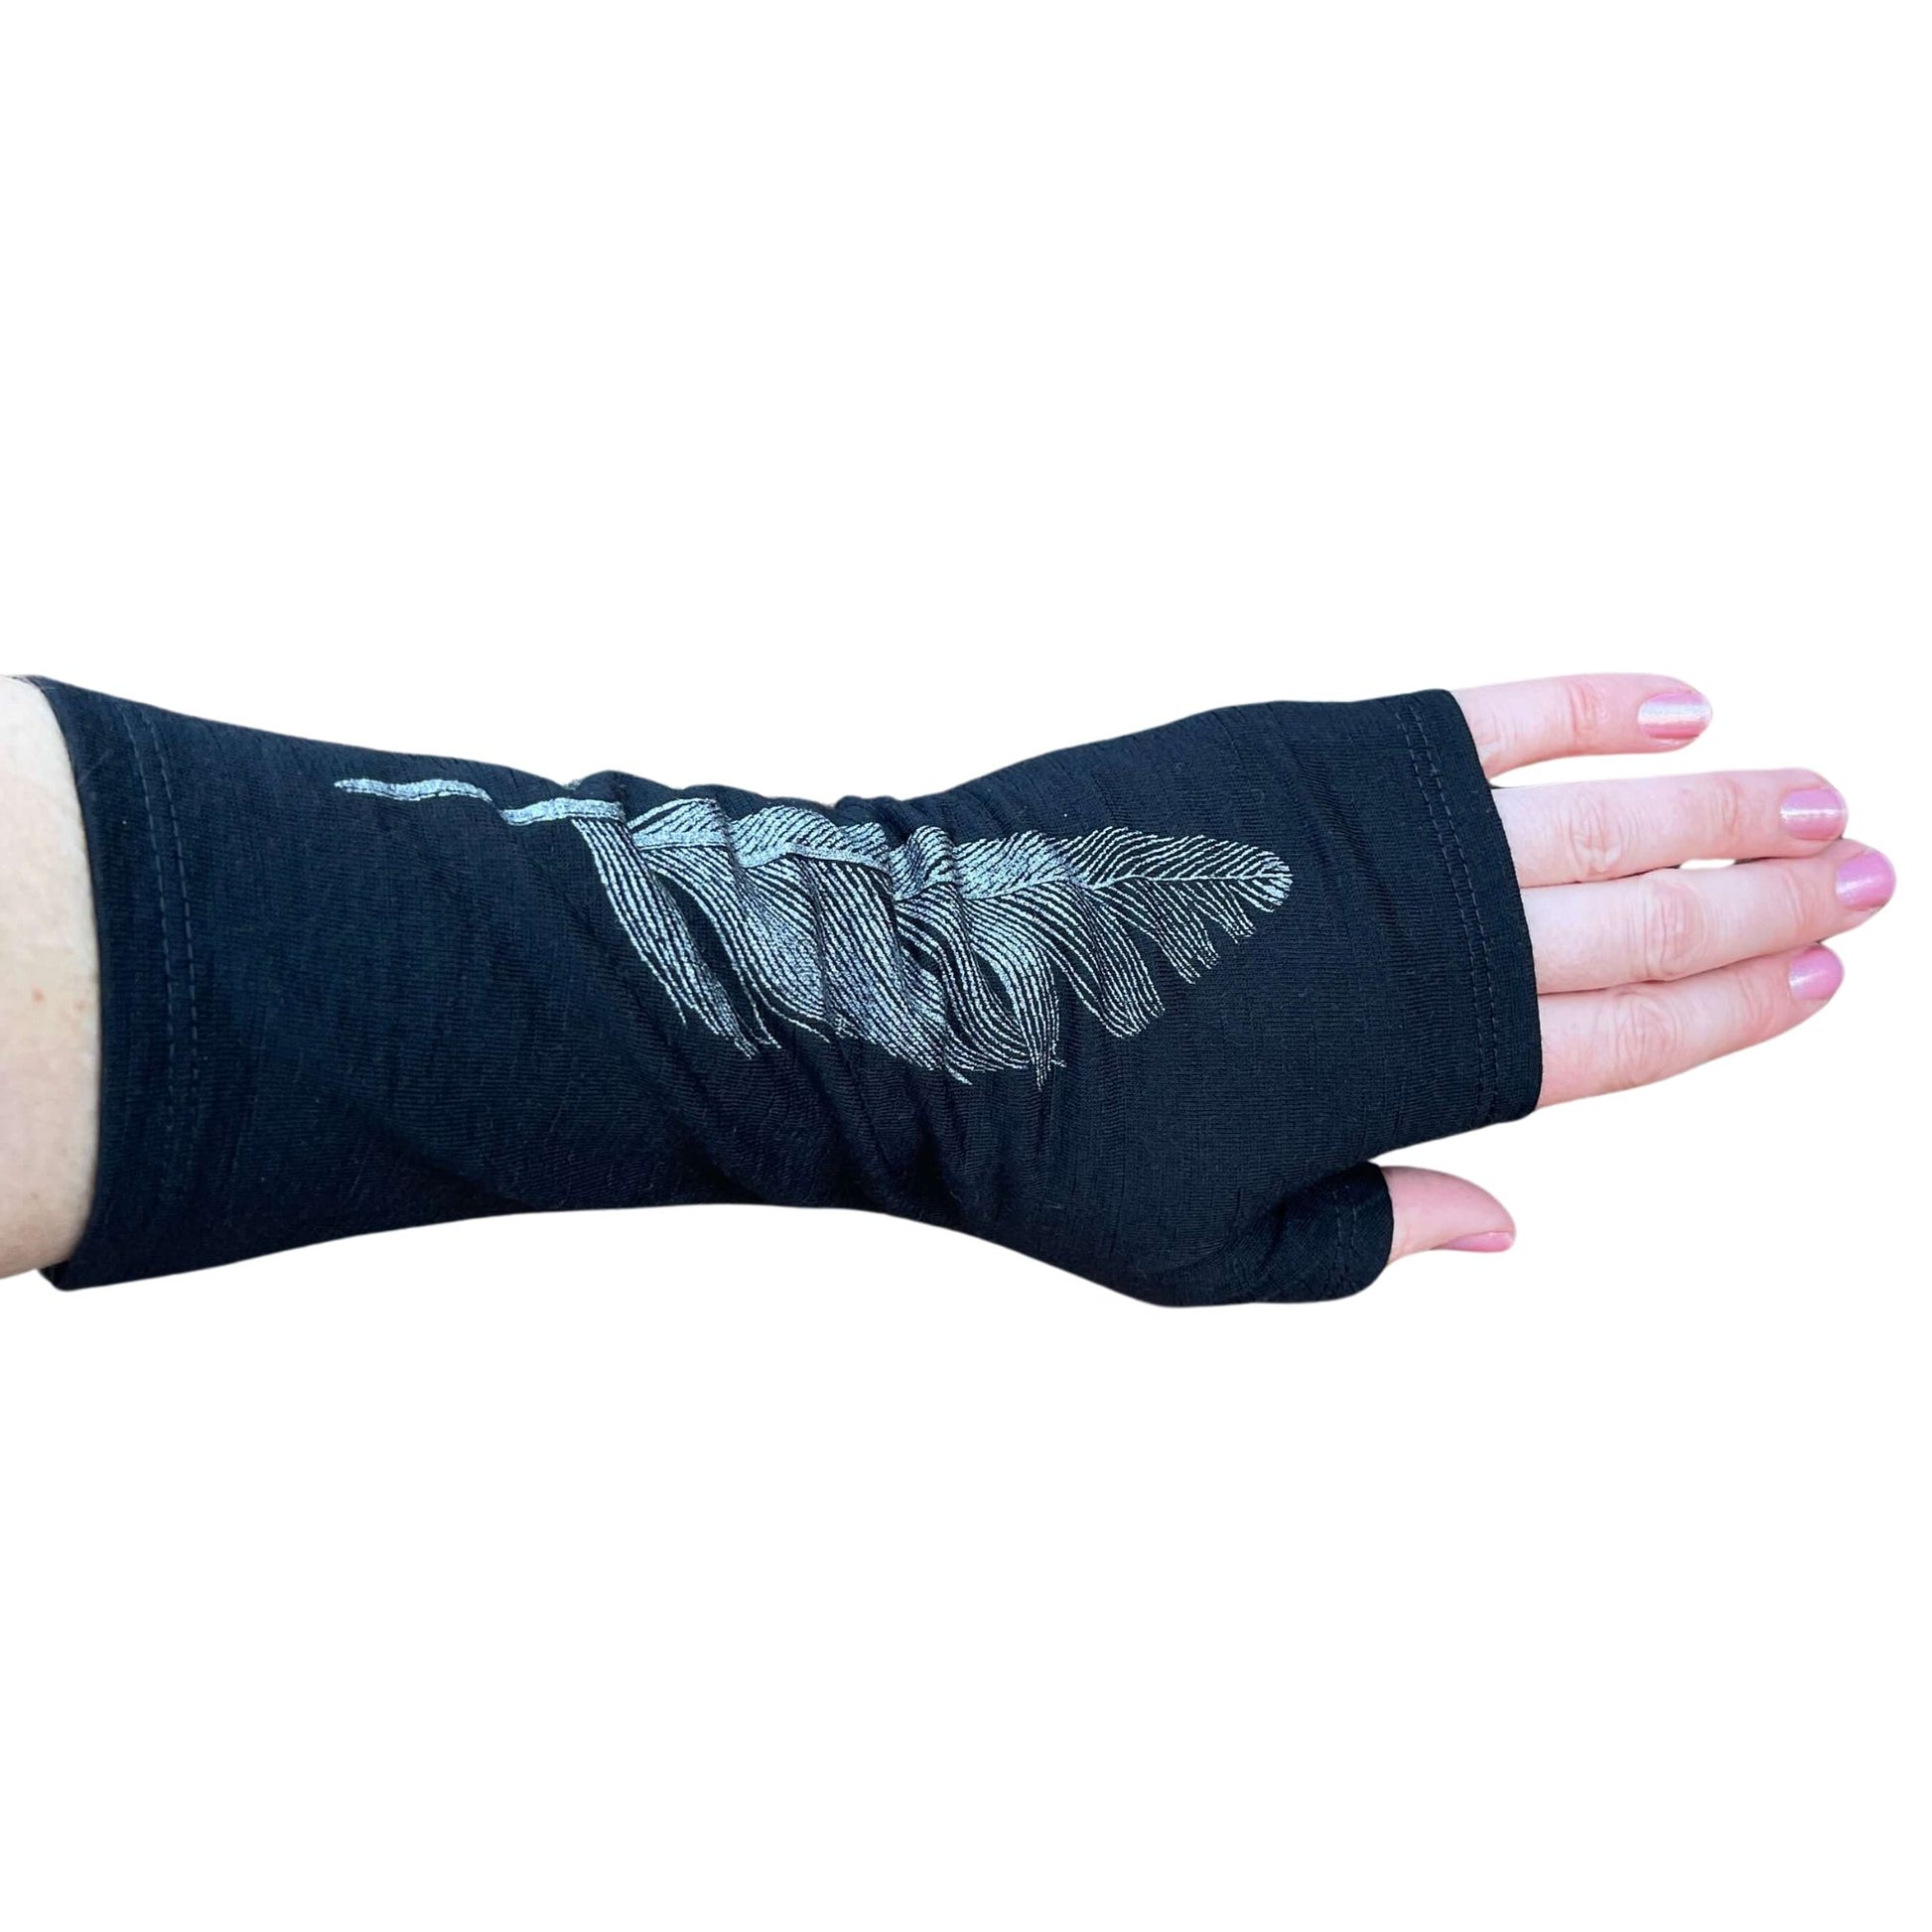 Fingerless merino gloves in black with silver feather print.